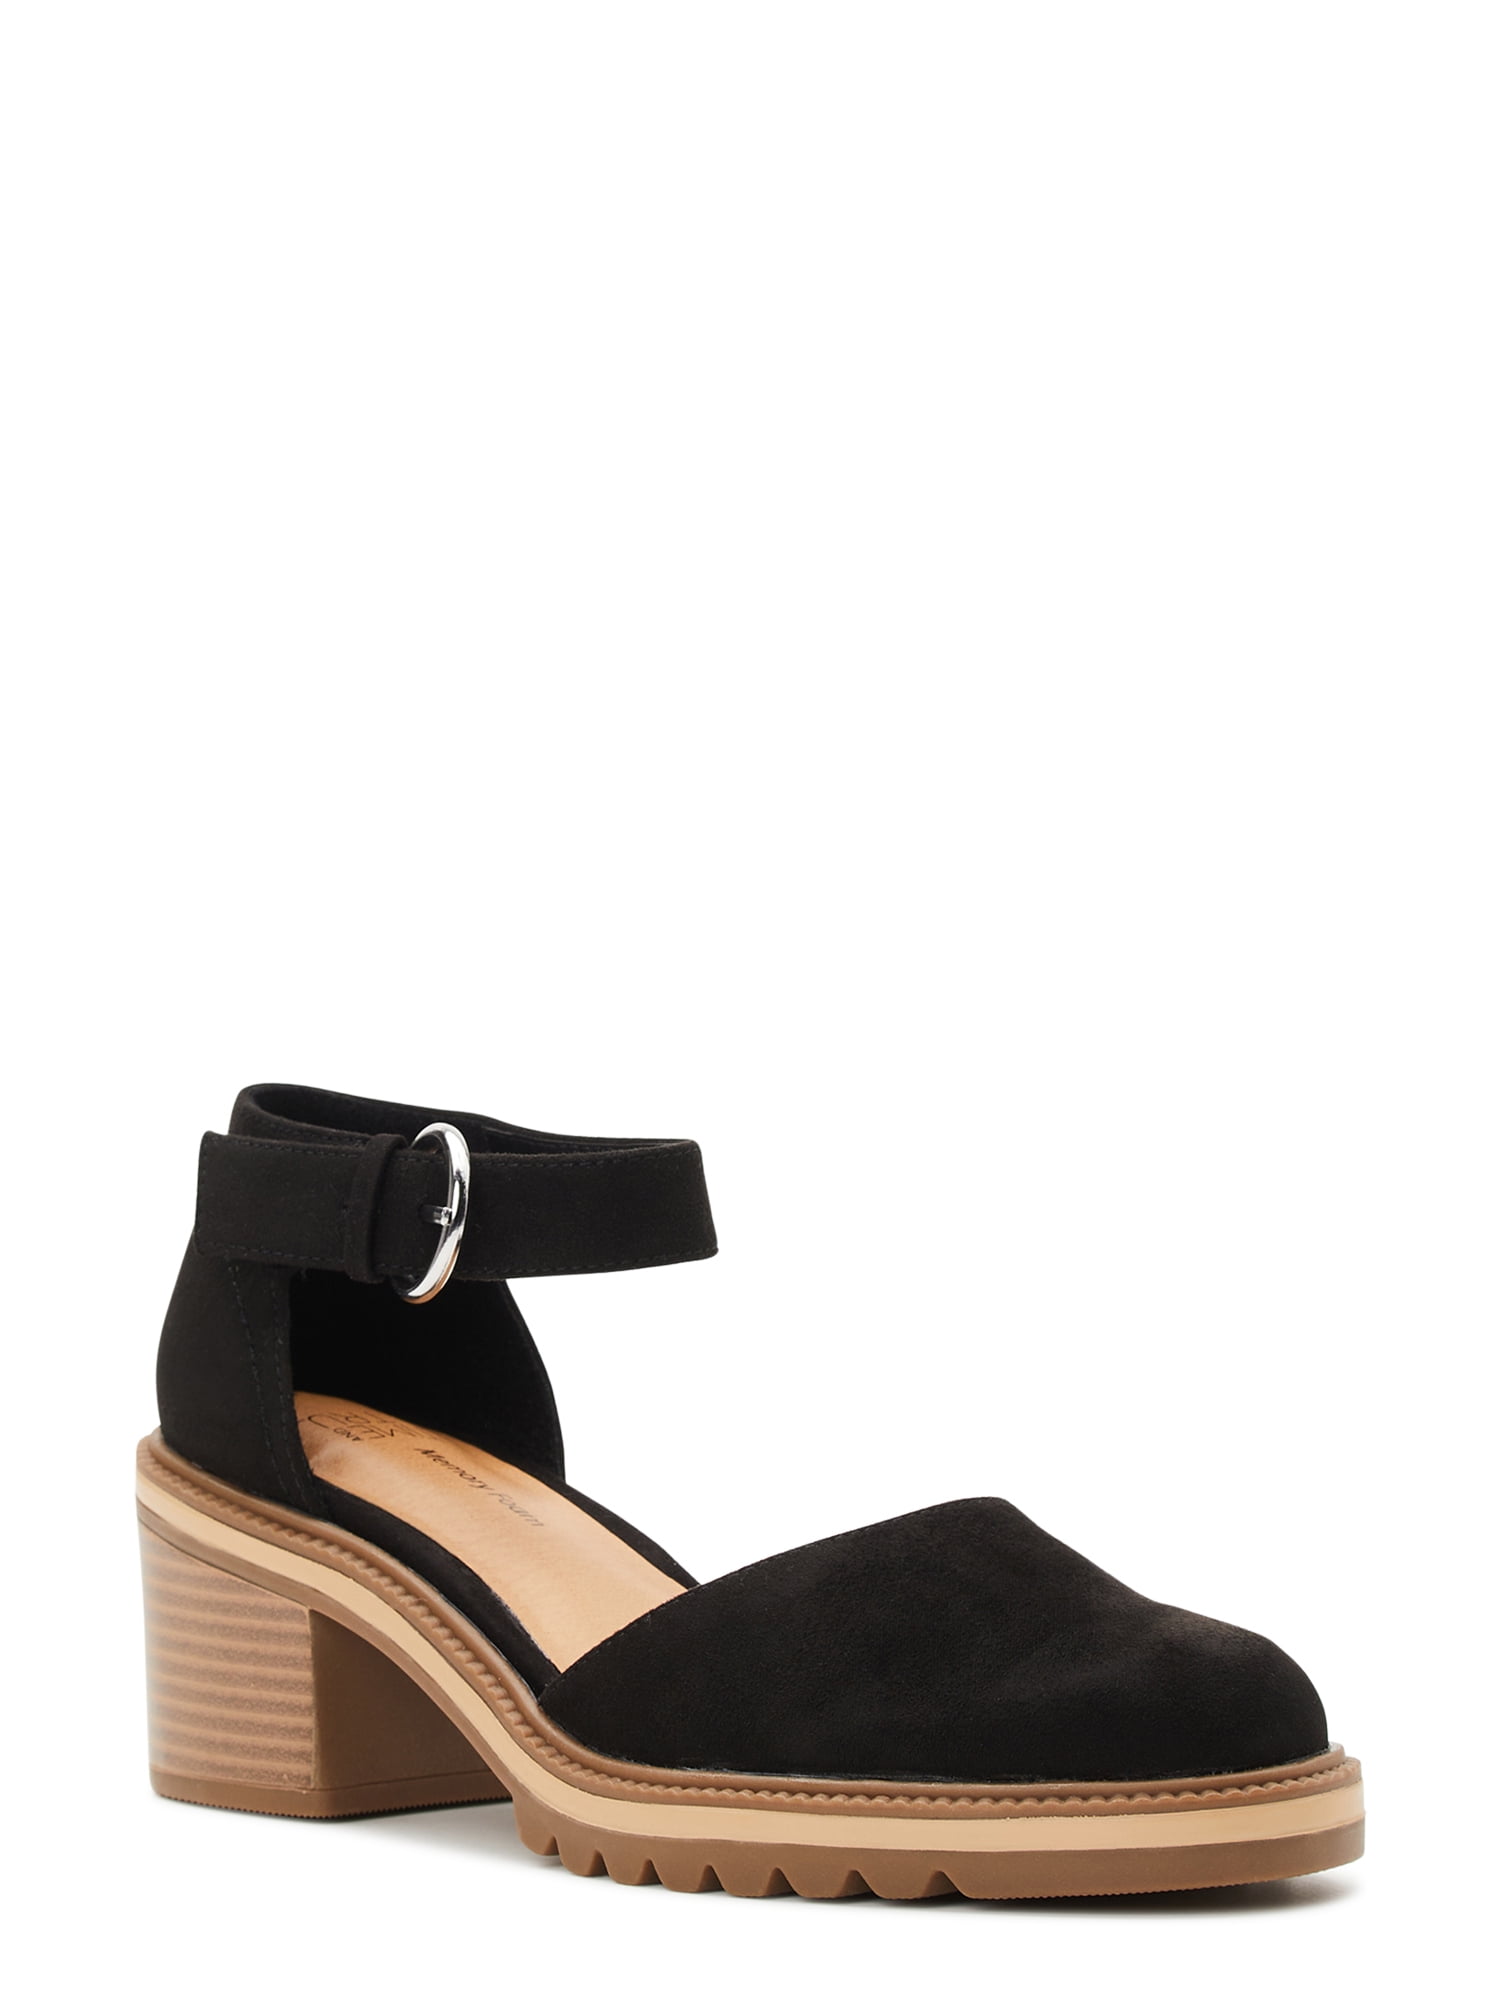 Lennox -Made to Order - Strappy Chunky Buckle Heel - Burju Shoes